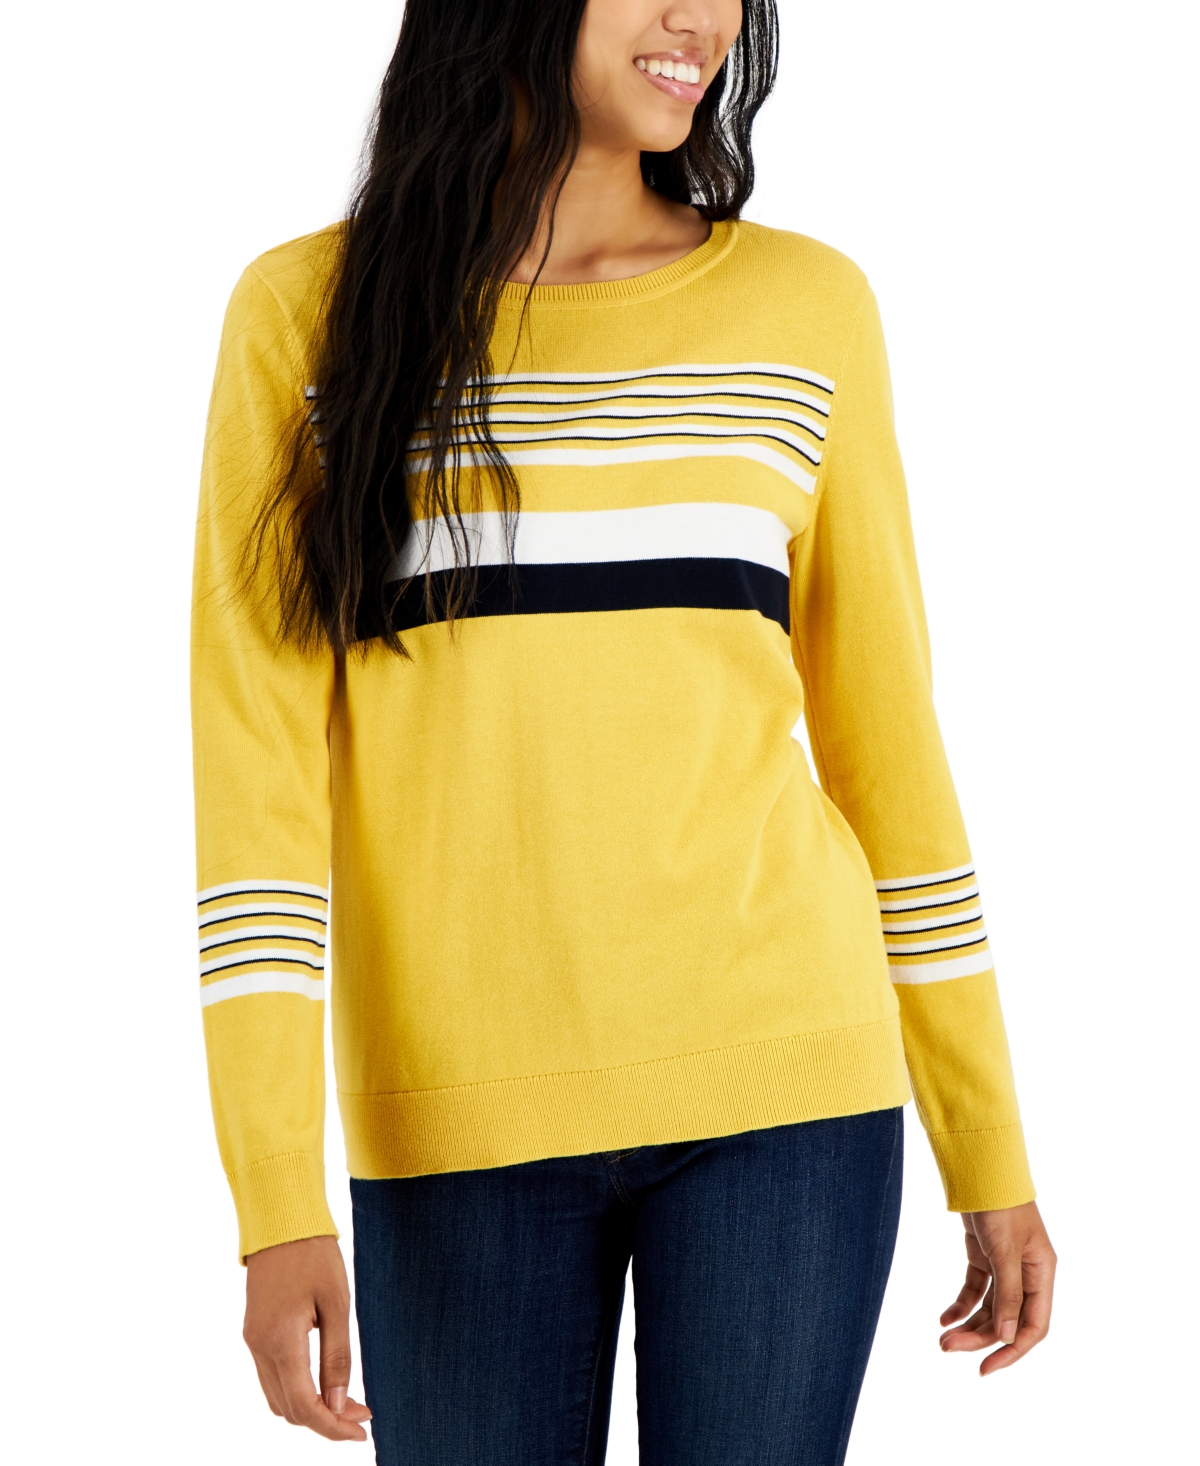 Tommy Hilfiger Women's Lucy Striped Cotton Sweater